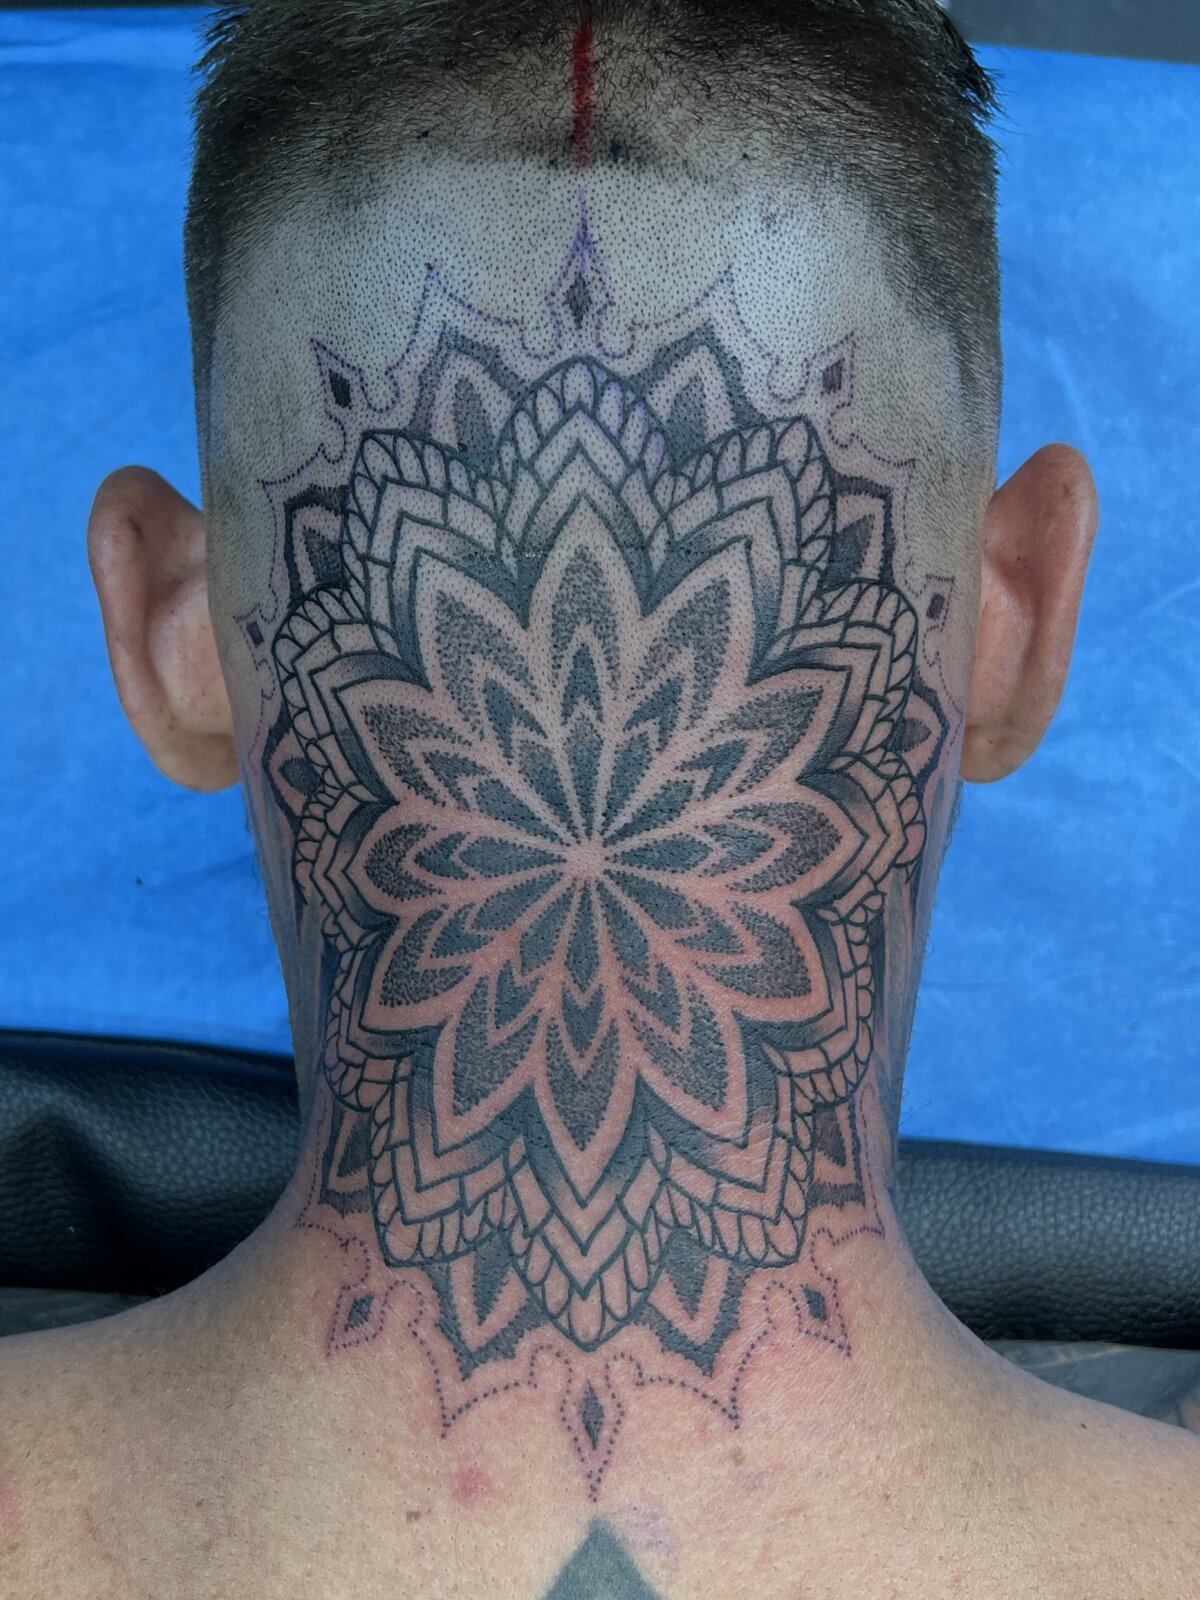 Mandala tattoo on the back of the head and neck